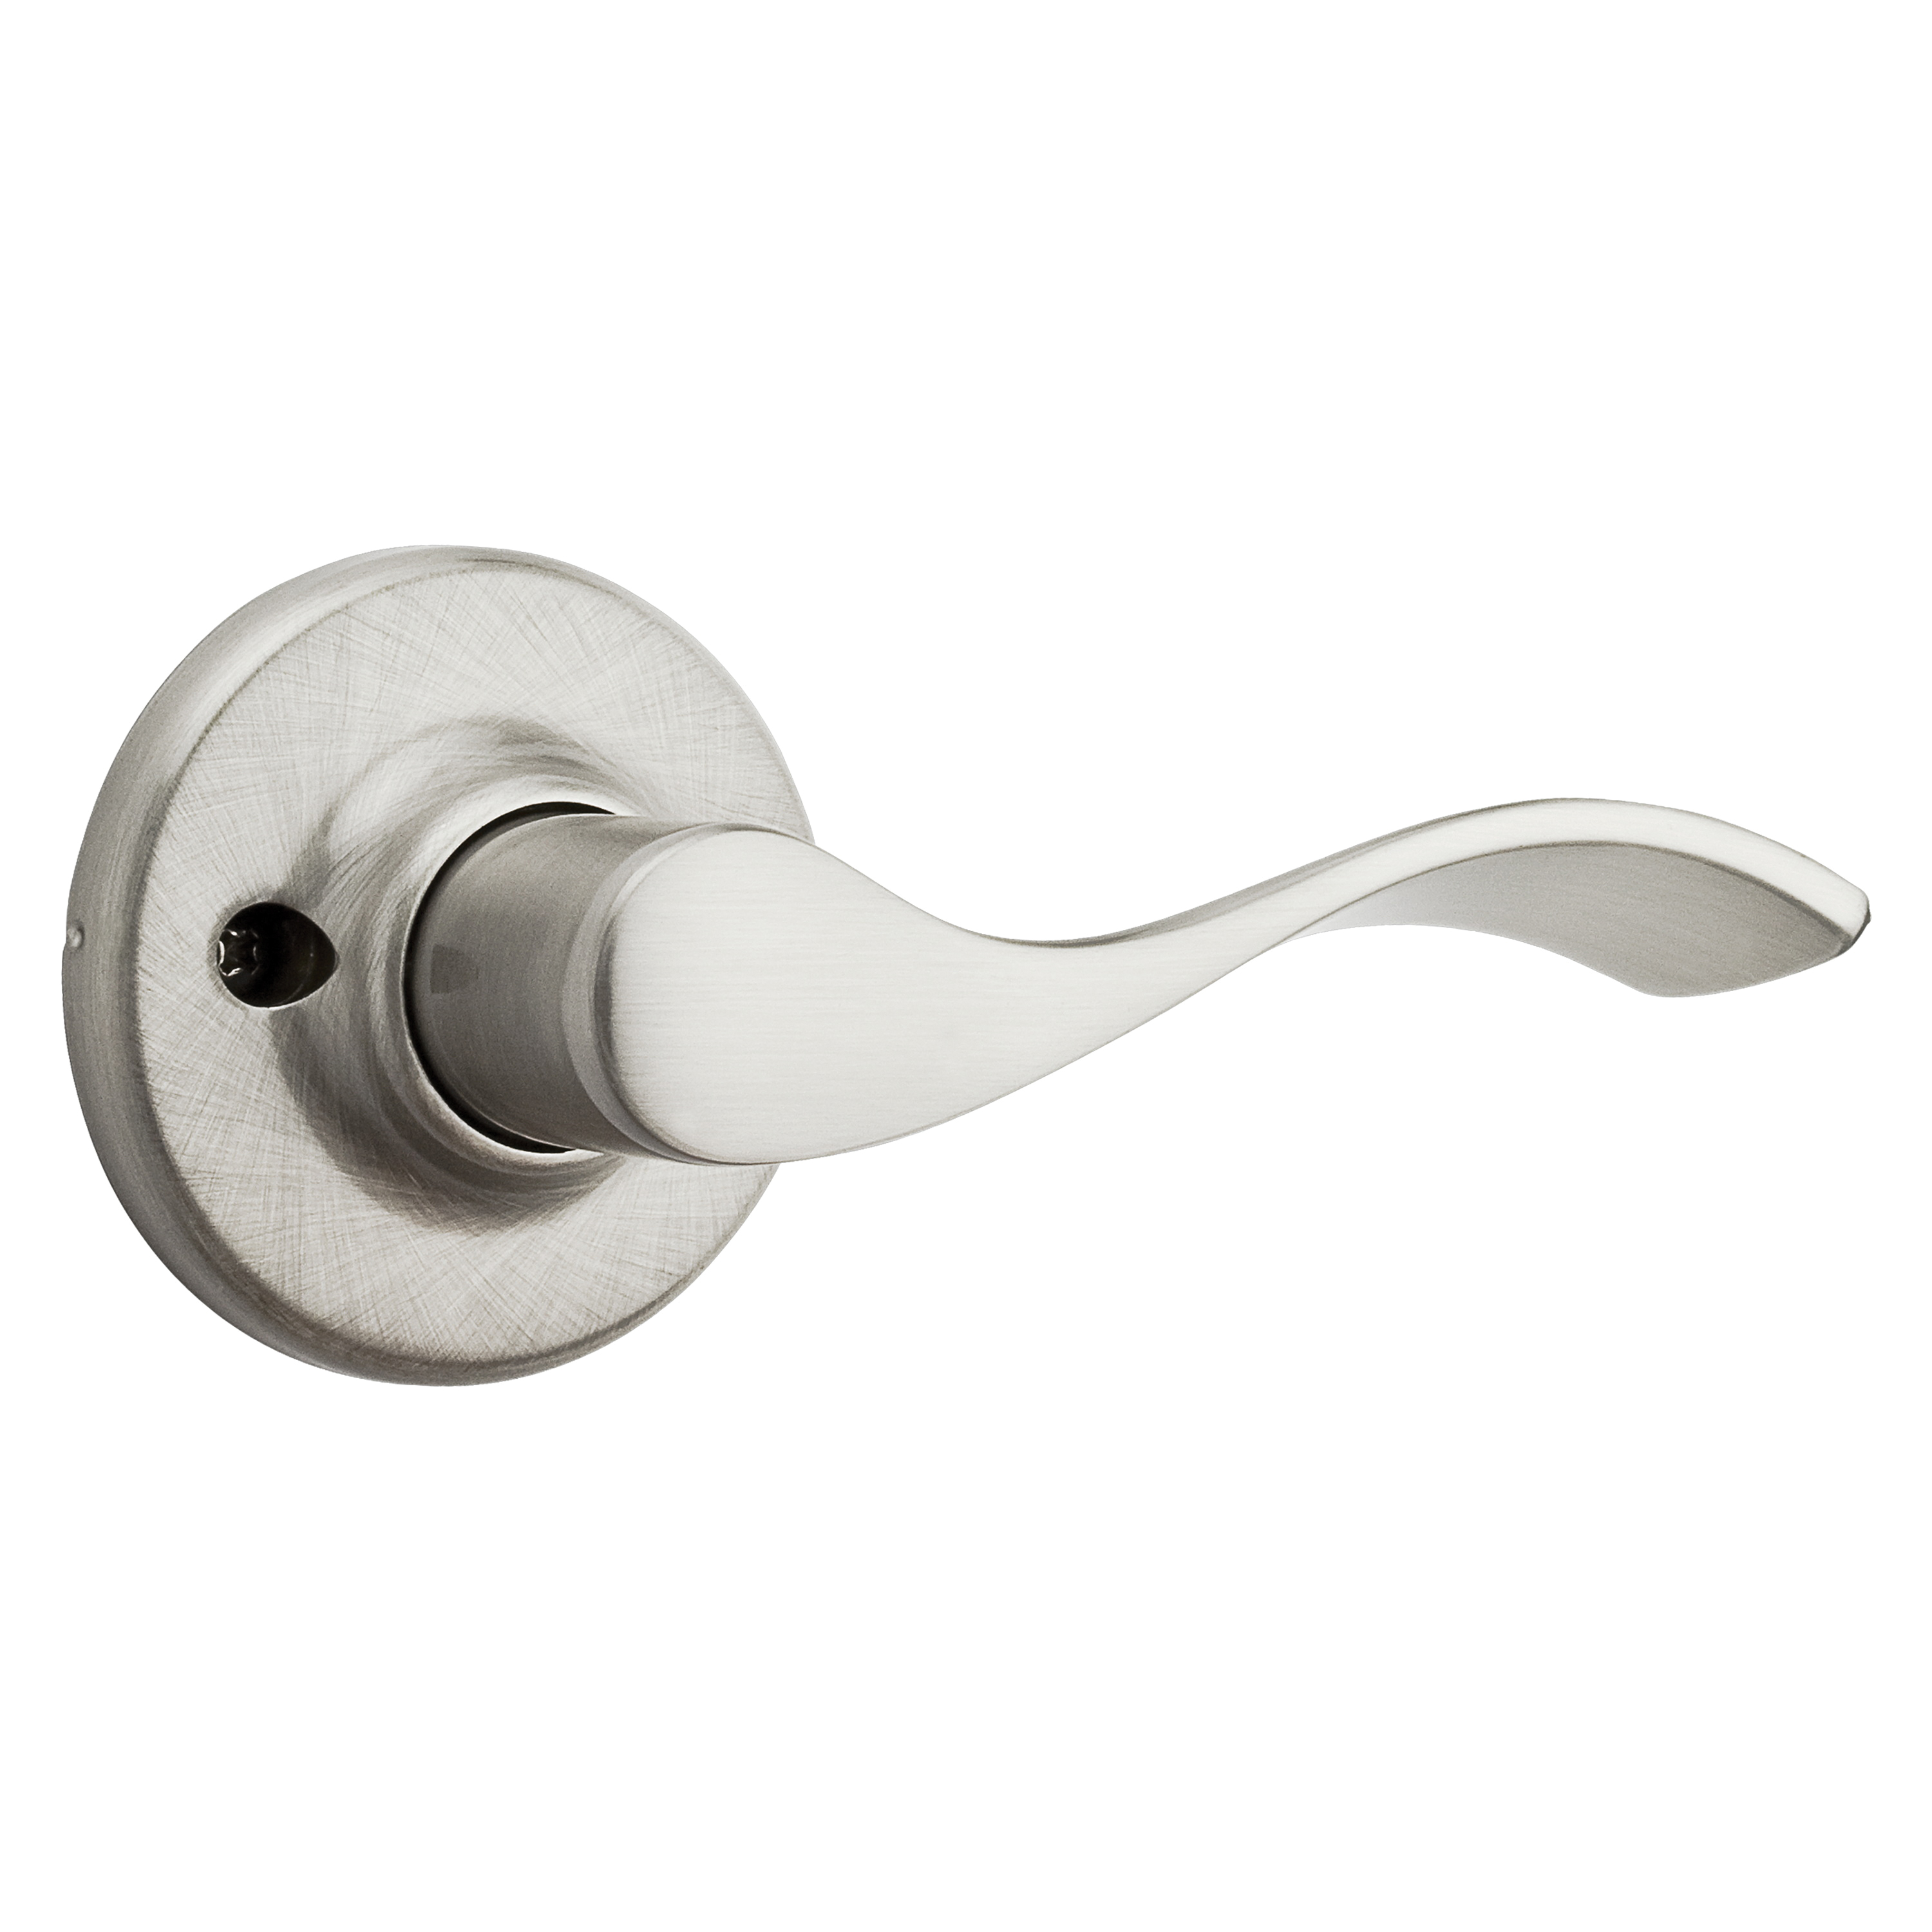 94880-492 Half Inactive Dummy Lever, Satin Nickel, Zinc, Residential, Re-Key Technology: SmartKey, Right Hand